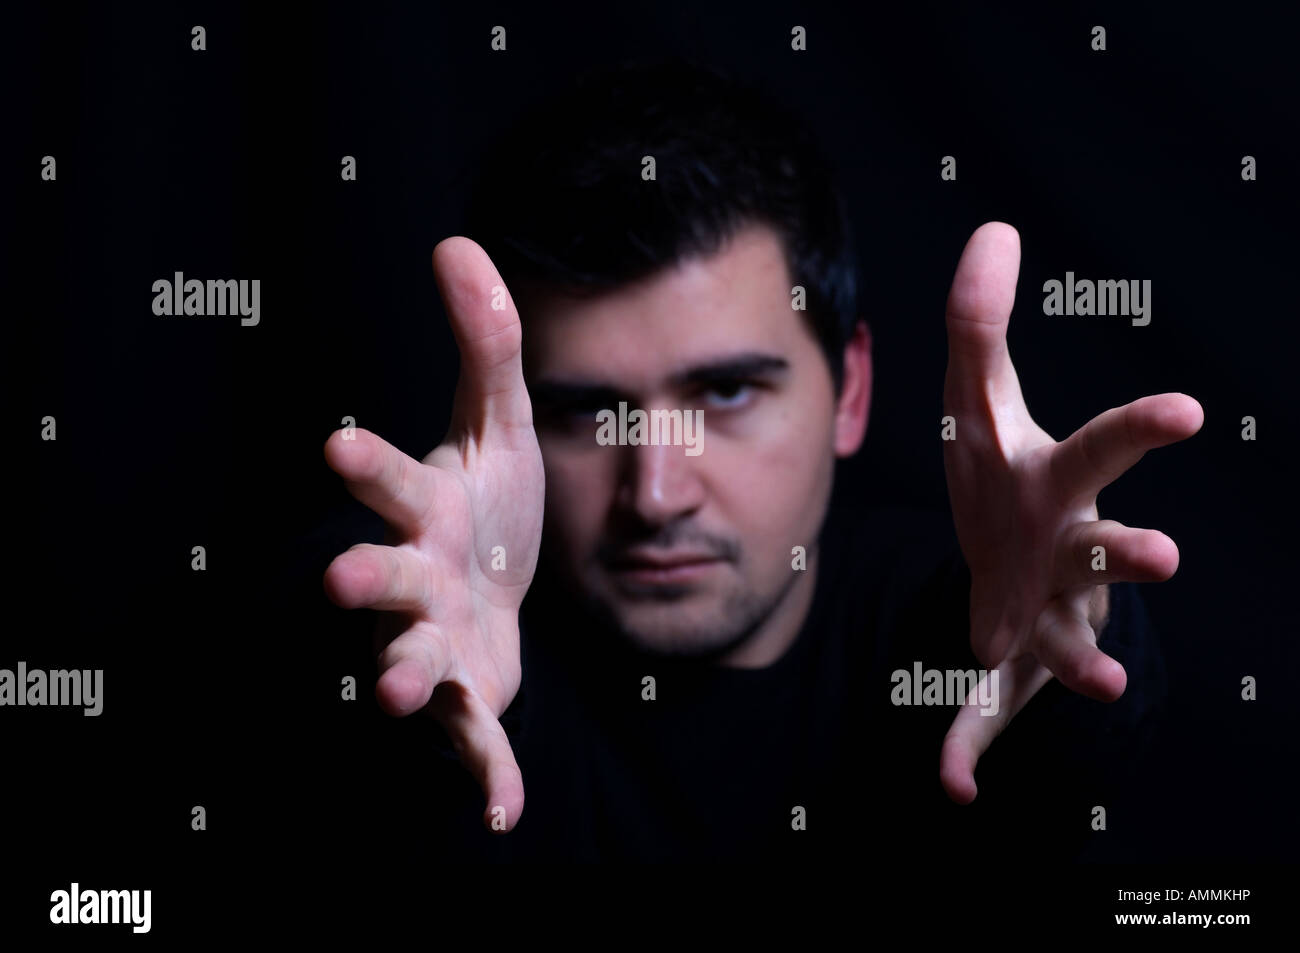 man showing grasping hands Stock Photo